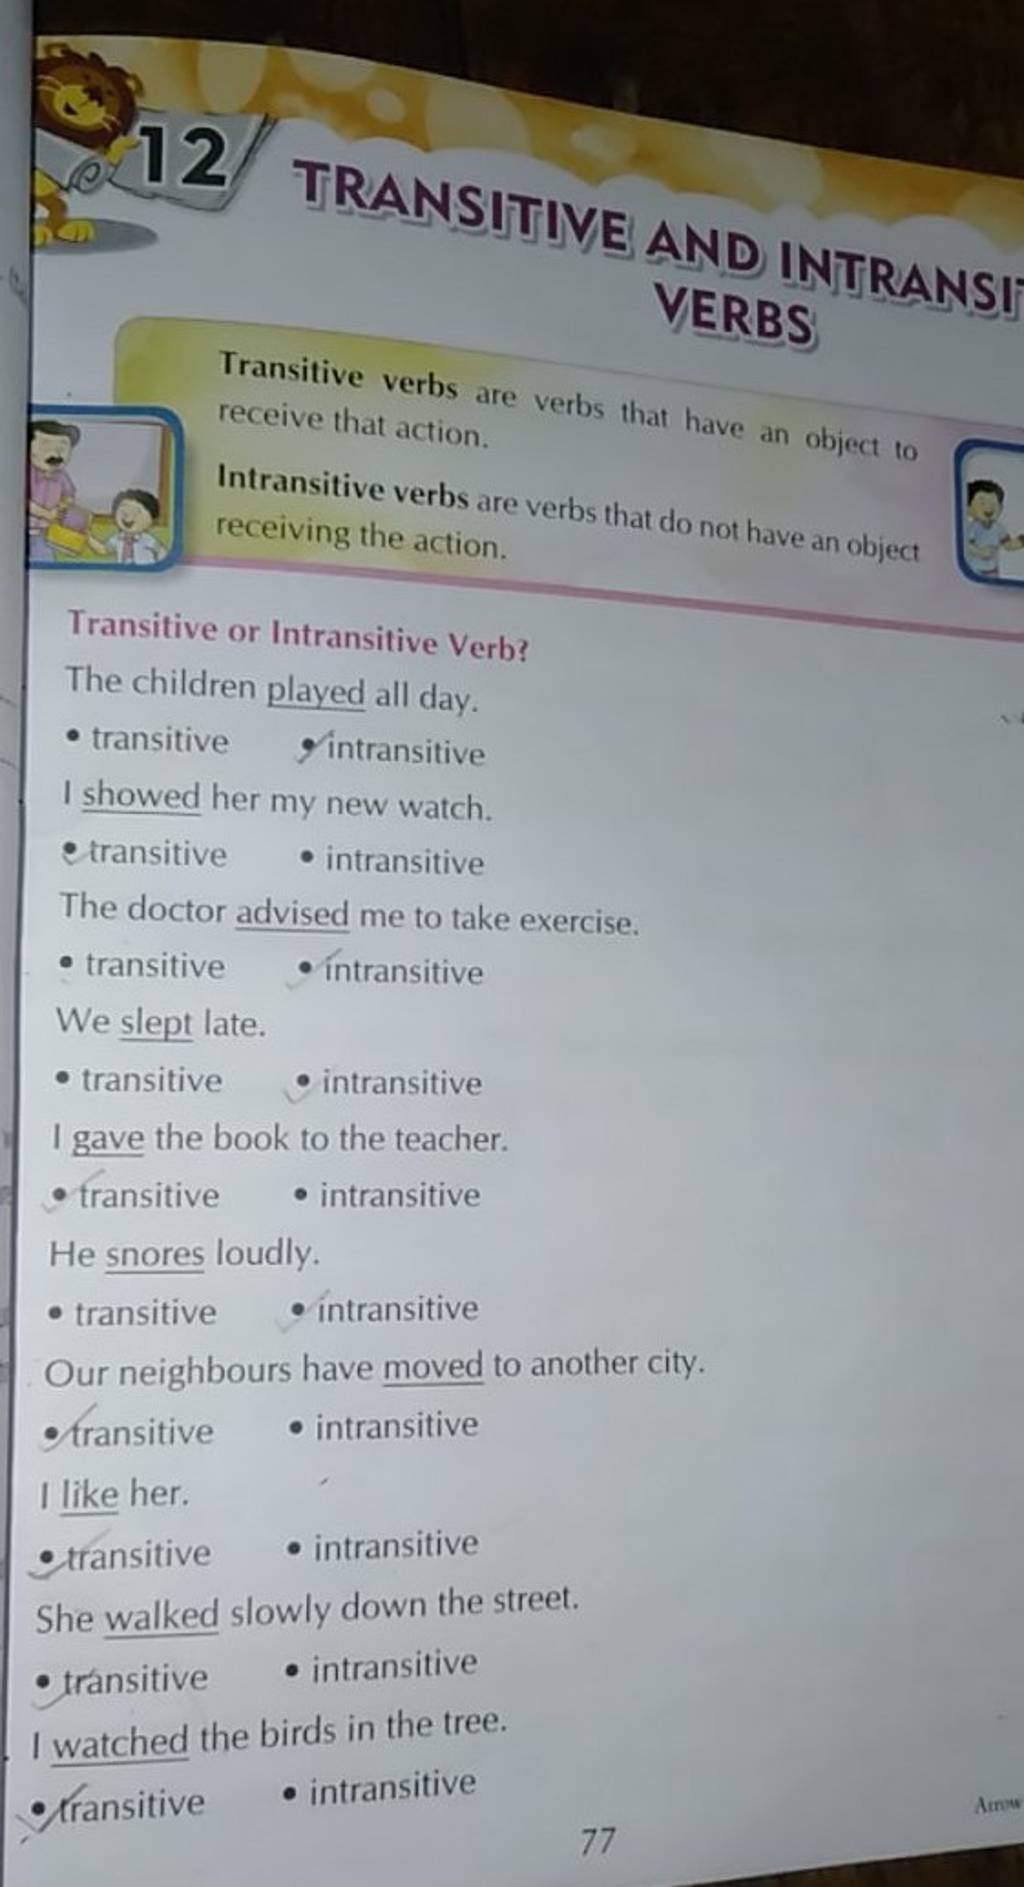 transitive-and-intransij-transitive-verbs-are-verbs-that-have-an-object-t